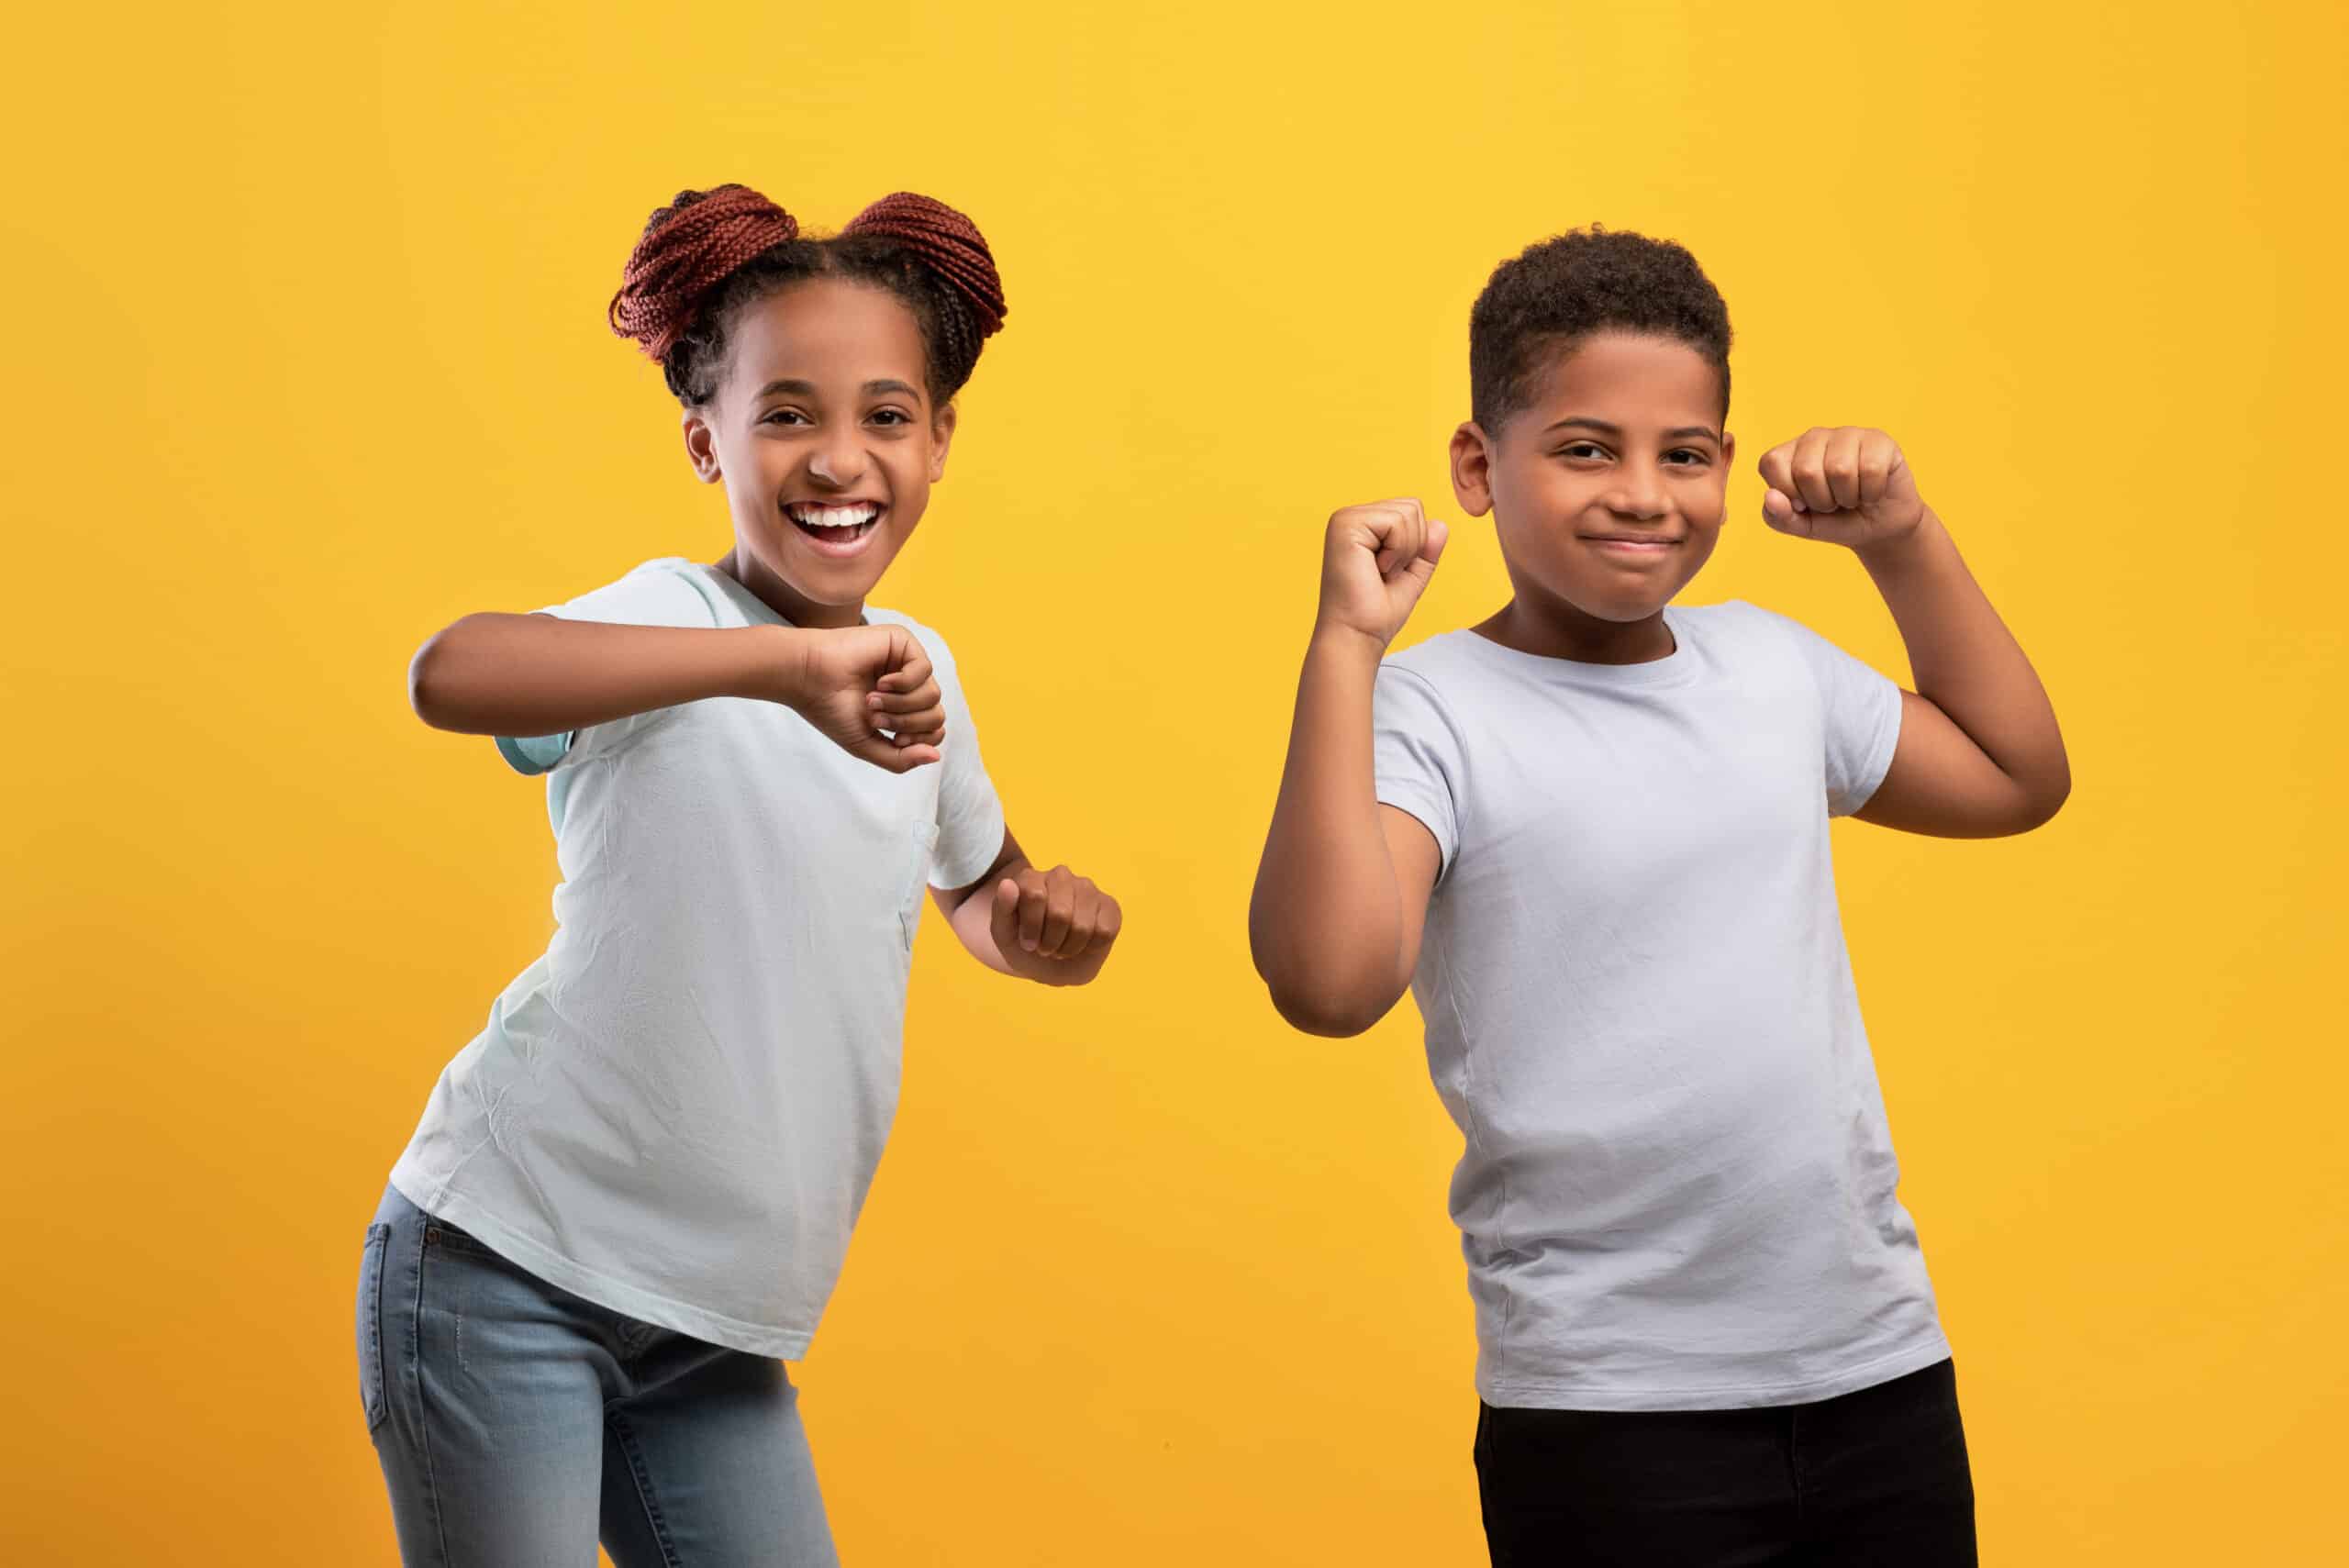 Two positive black children dancing together and cheerfully smiling over yellow studio background, adorable african american brother and sister having fun together, wearing white t-shirts